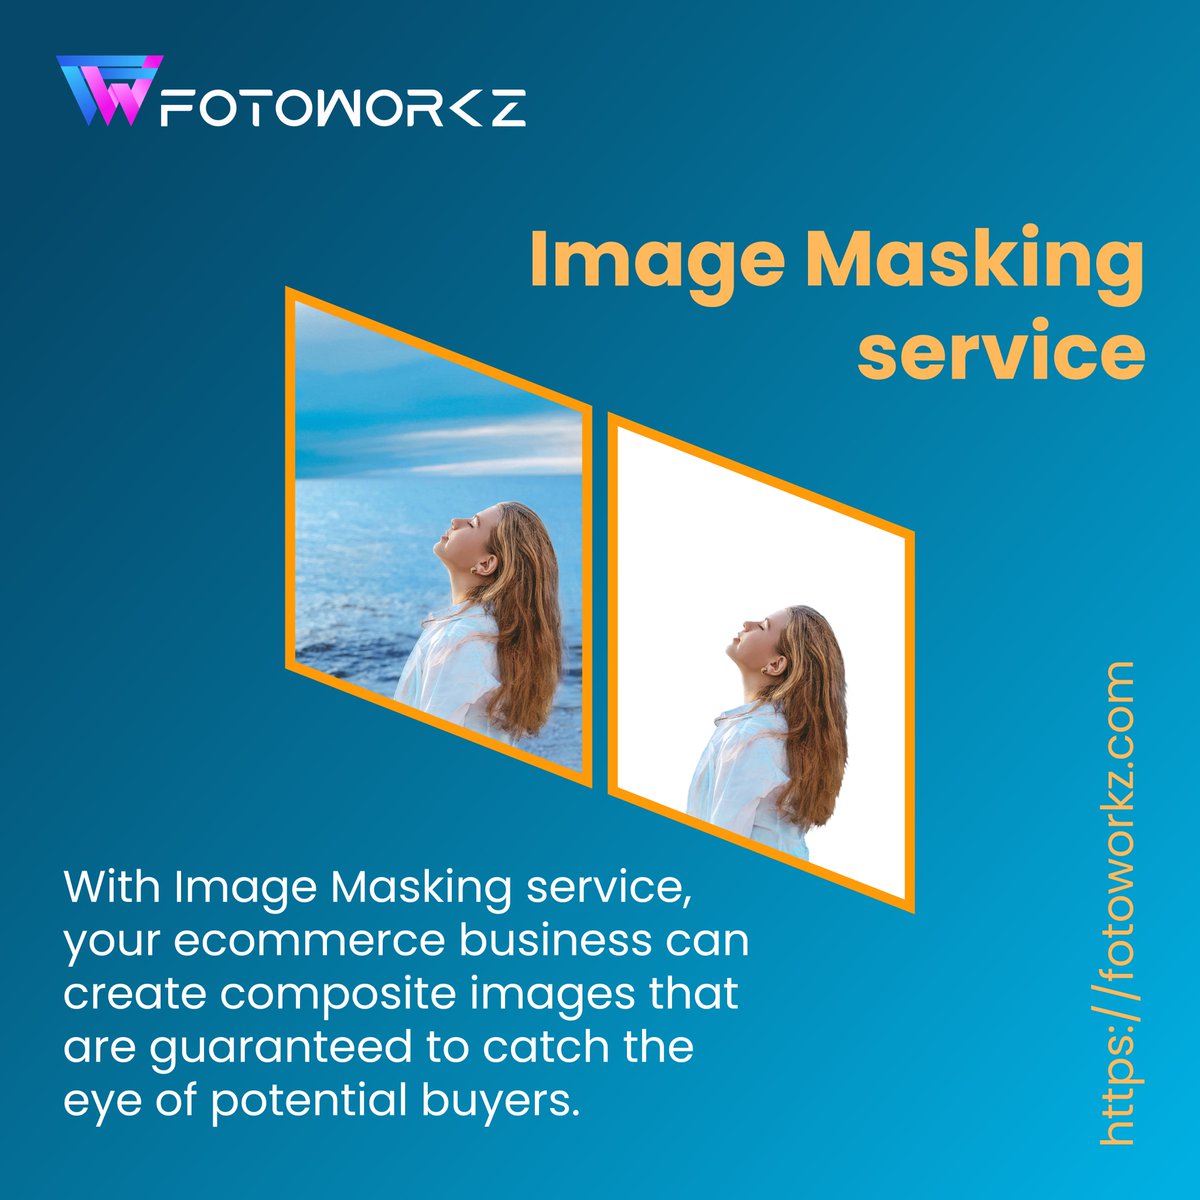 Transform your visuals with our top-notch Image Masking service!✨ Say goodbye to dull backgrounds and hello to creativity unleashed. 🌈 From product photography to profile pics, achieve the look you want effortlessly. tinyurl.com/4n4vre4c #ImageMasking #Ecommerce #FotoWorkz